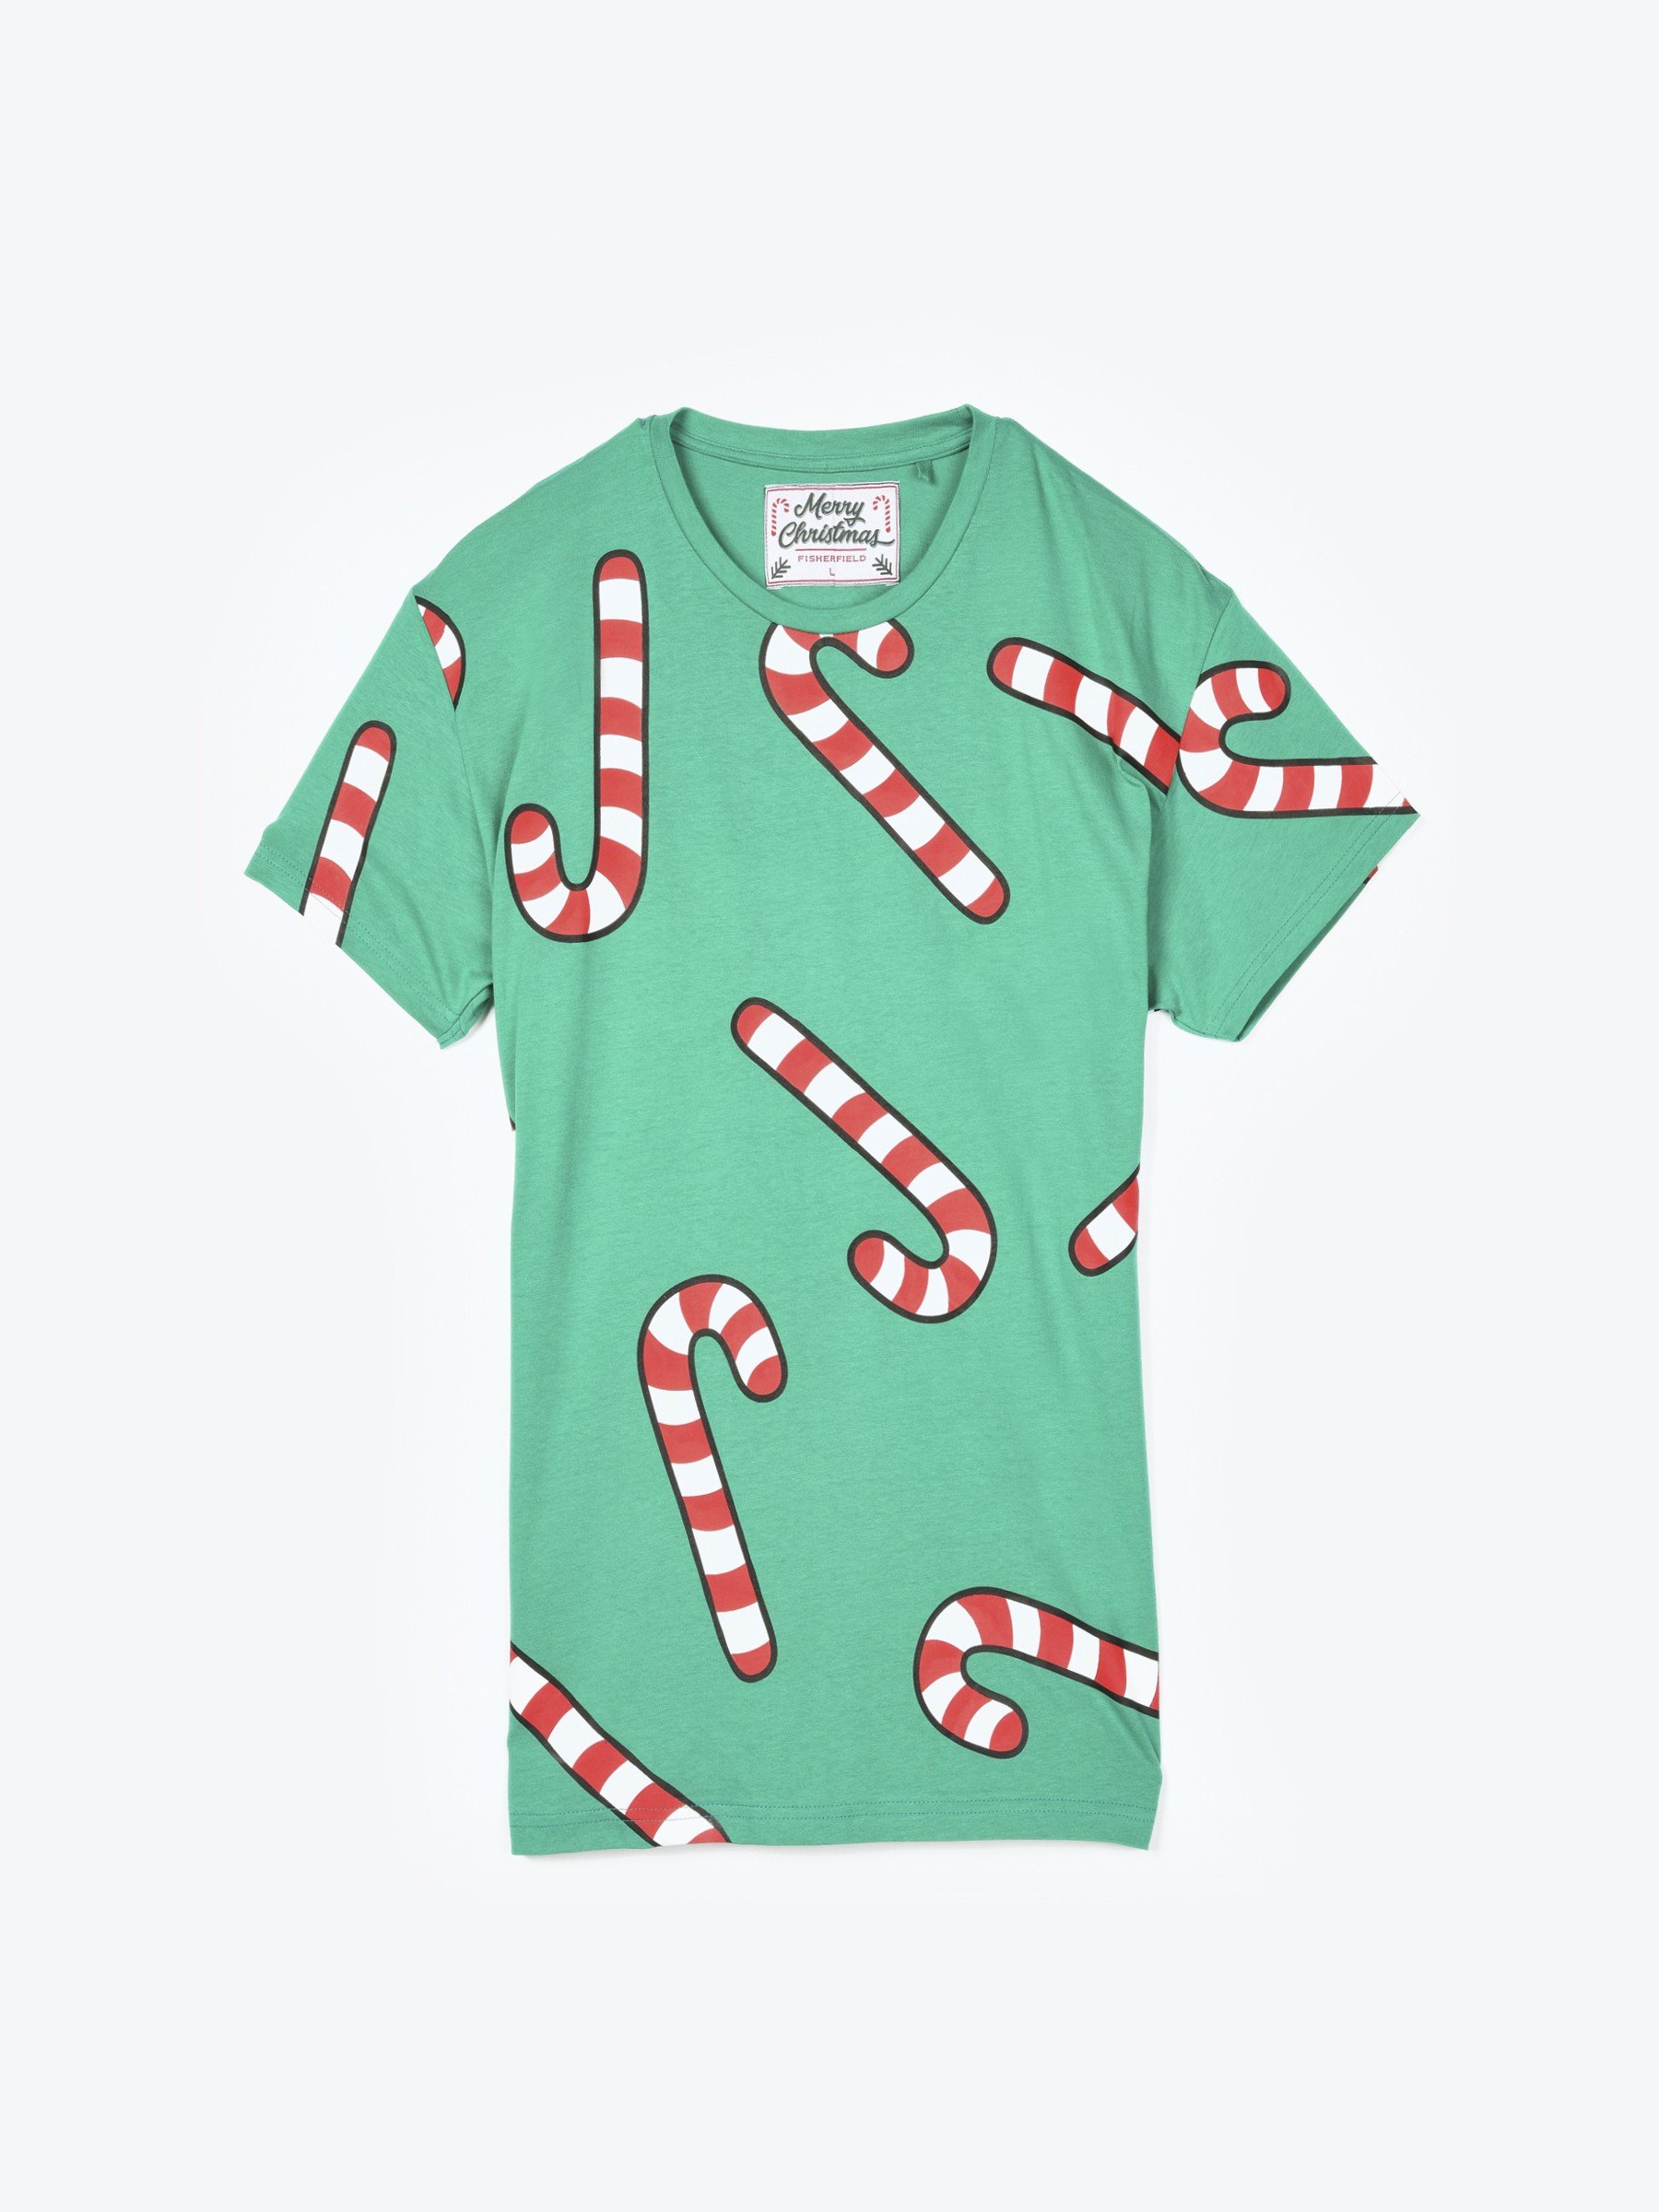 green and red graphic tee